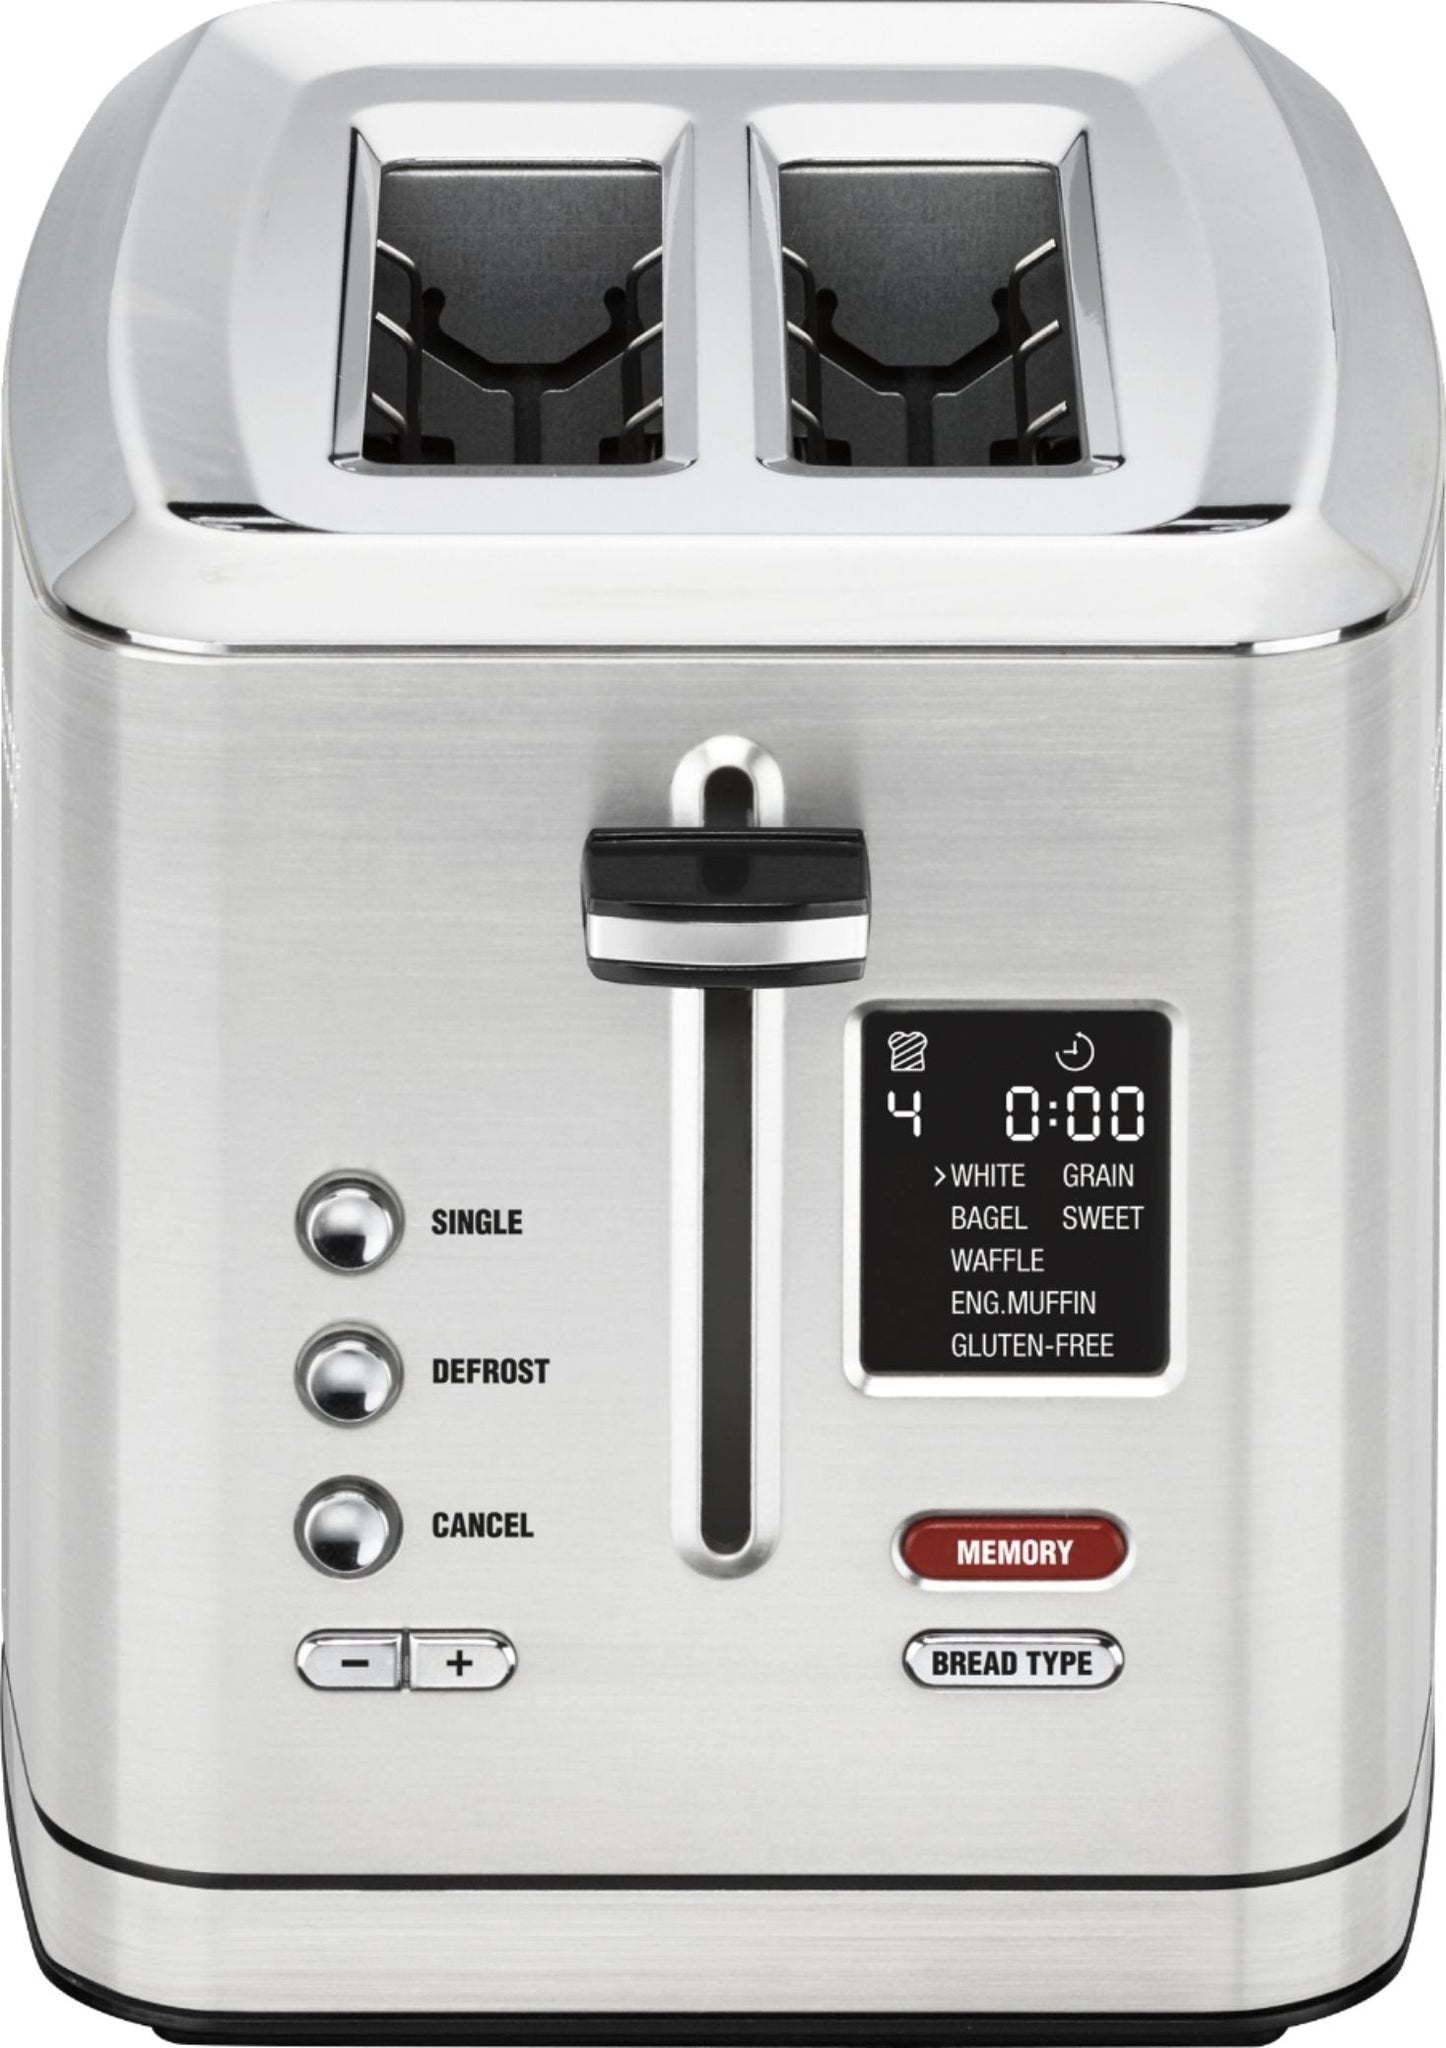 Cuisinart - 2-Slice Digital Toaster With MemorySet - CPT-720C